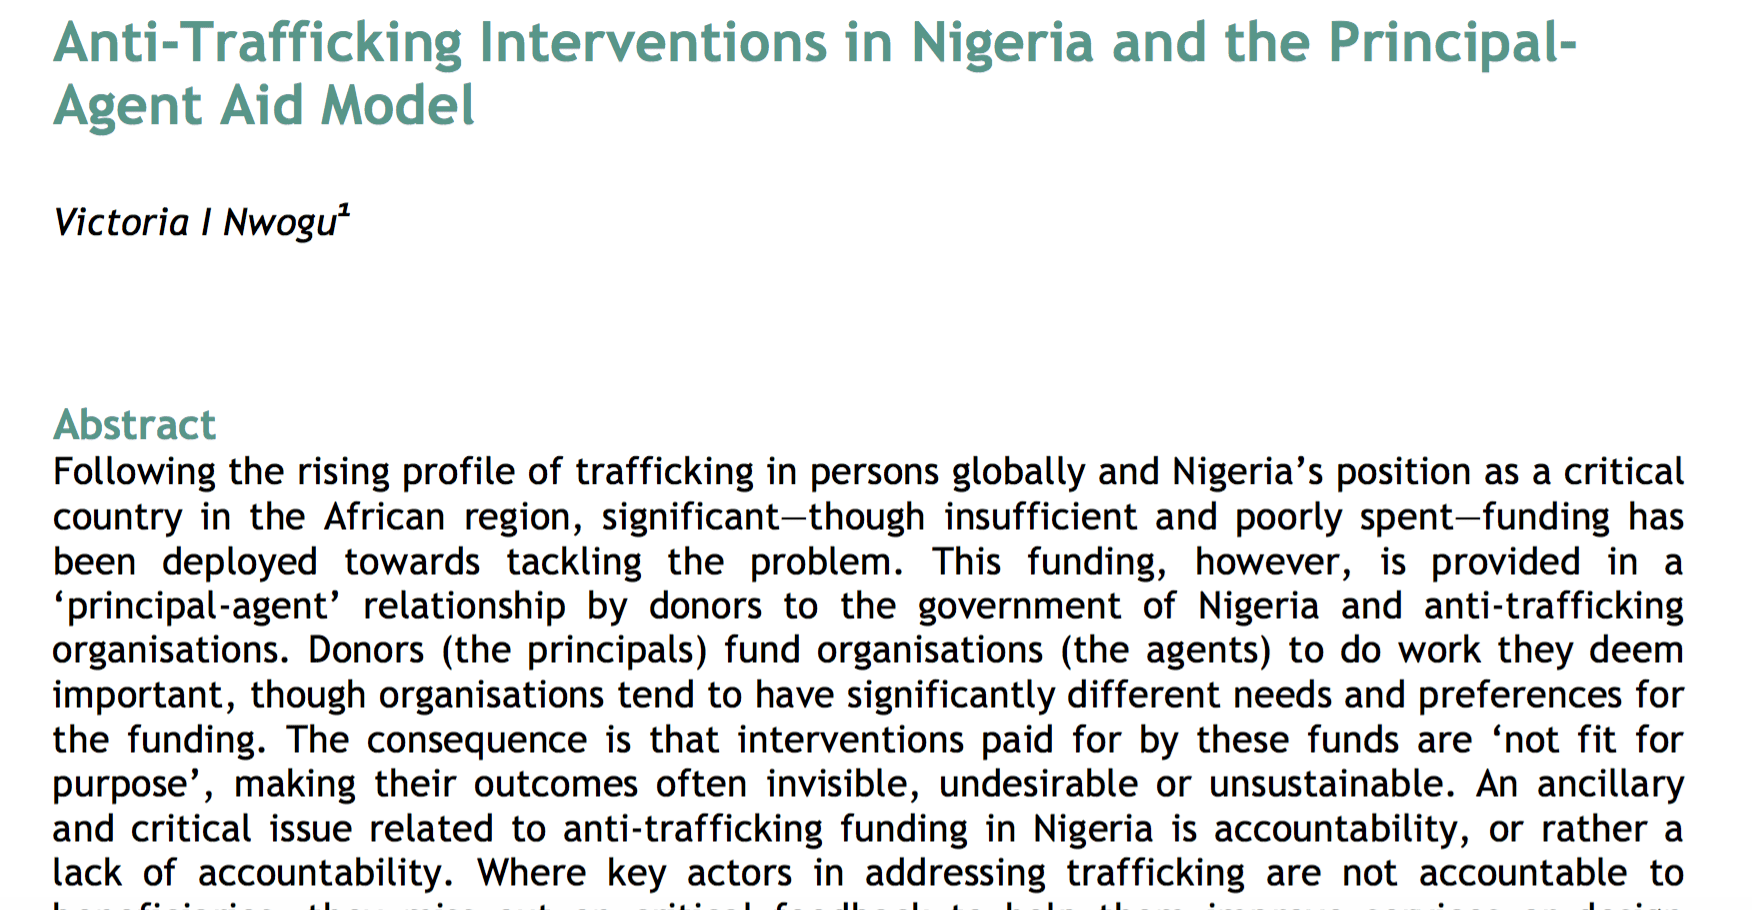 Anti-trafficking interventions in Nigeria and the principal-agent aid model